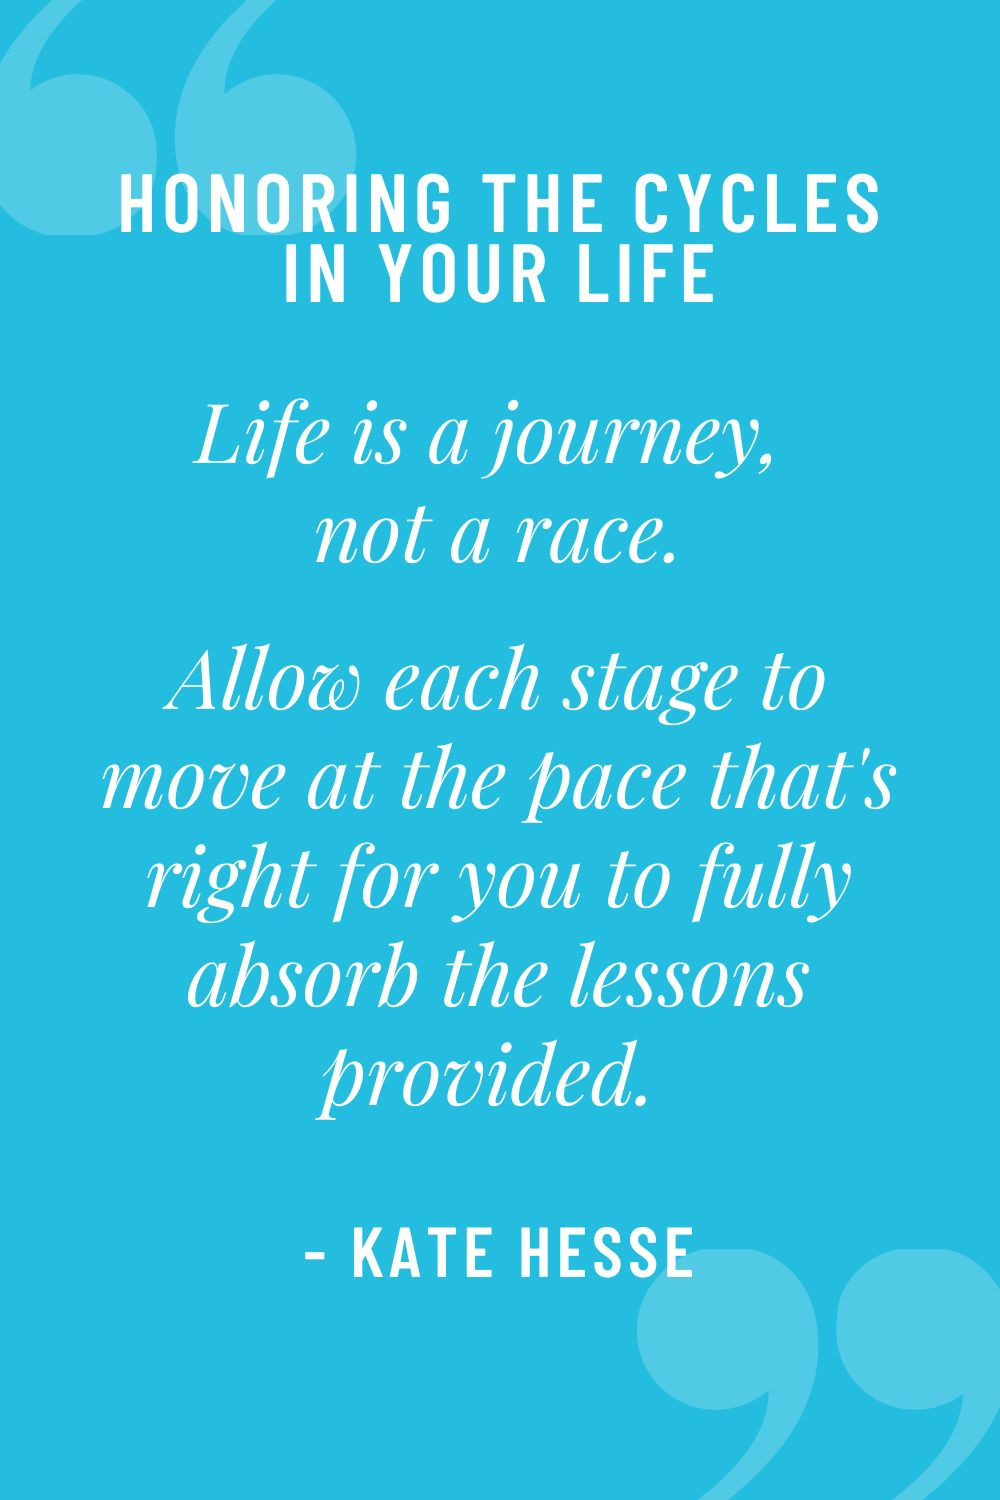 Life is a journey, not a race. Alllow each stage to move at the pace that's right for you to fully absorb the lessons provided.